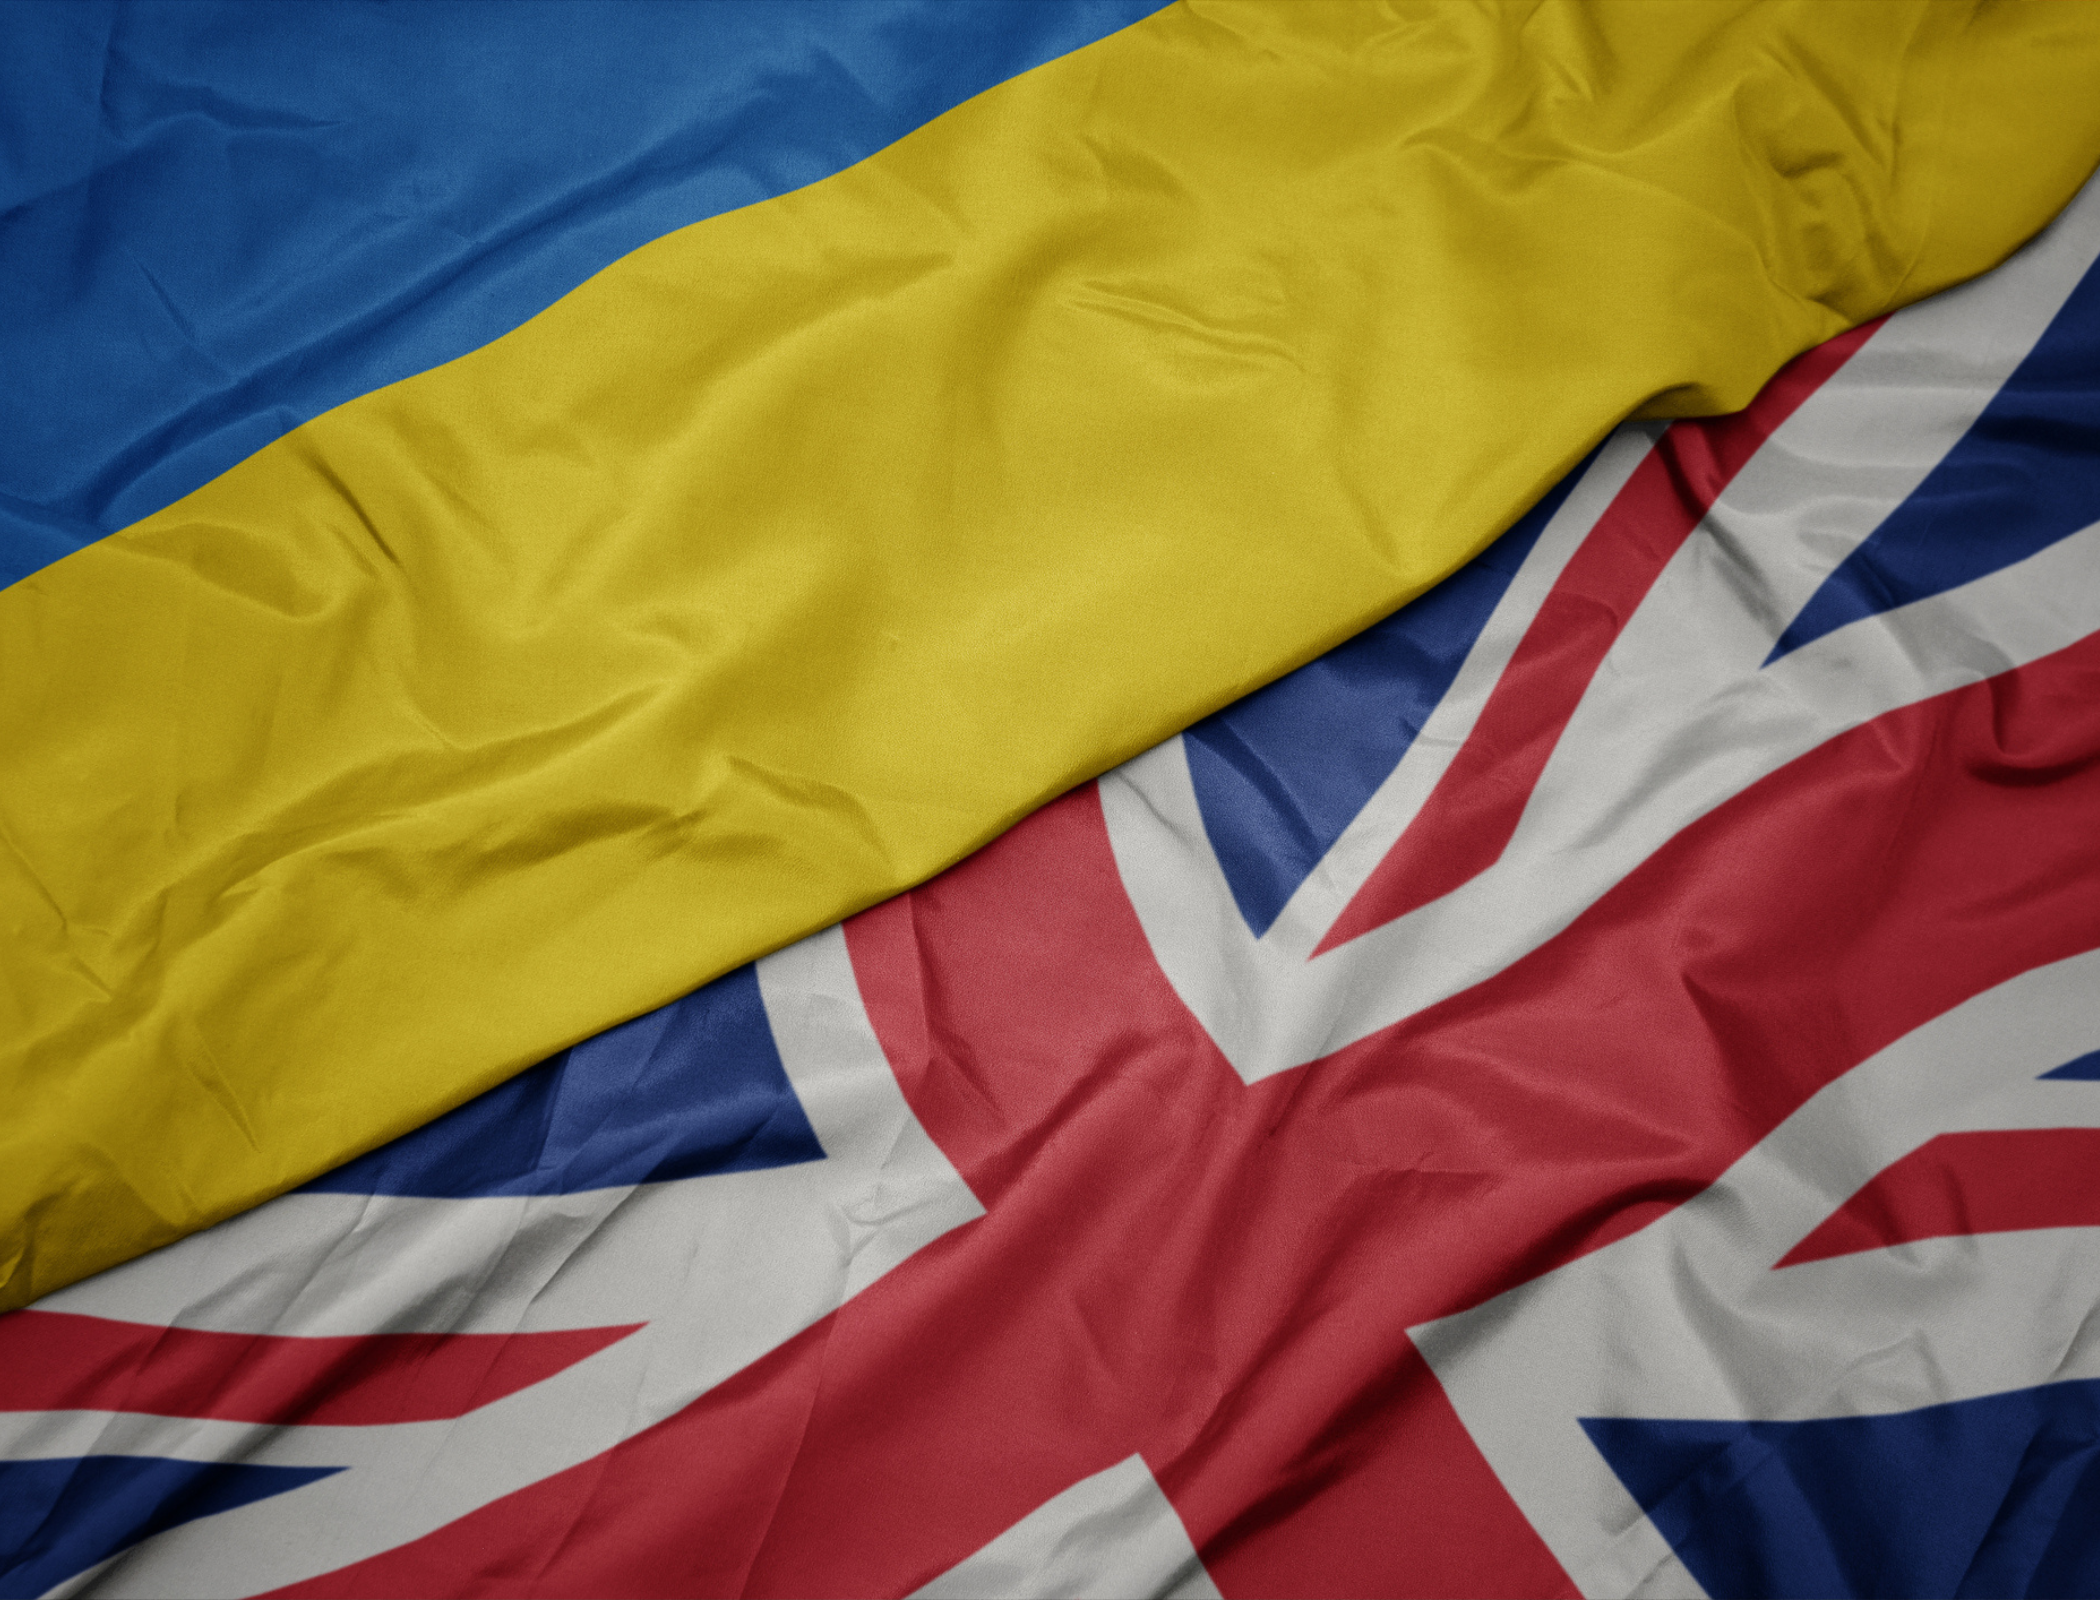 UK and Ukraine announce a ‘new era of modern trade’ with new deal